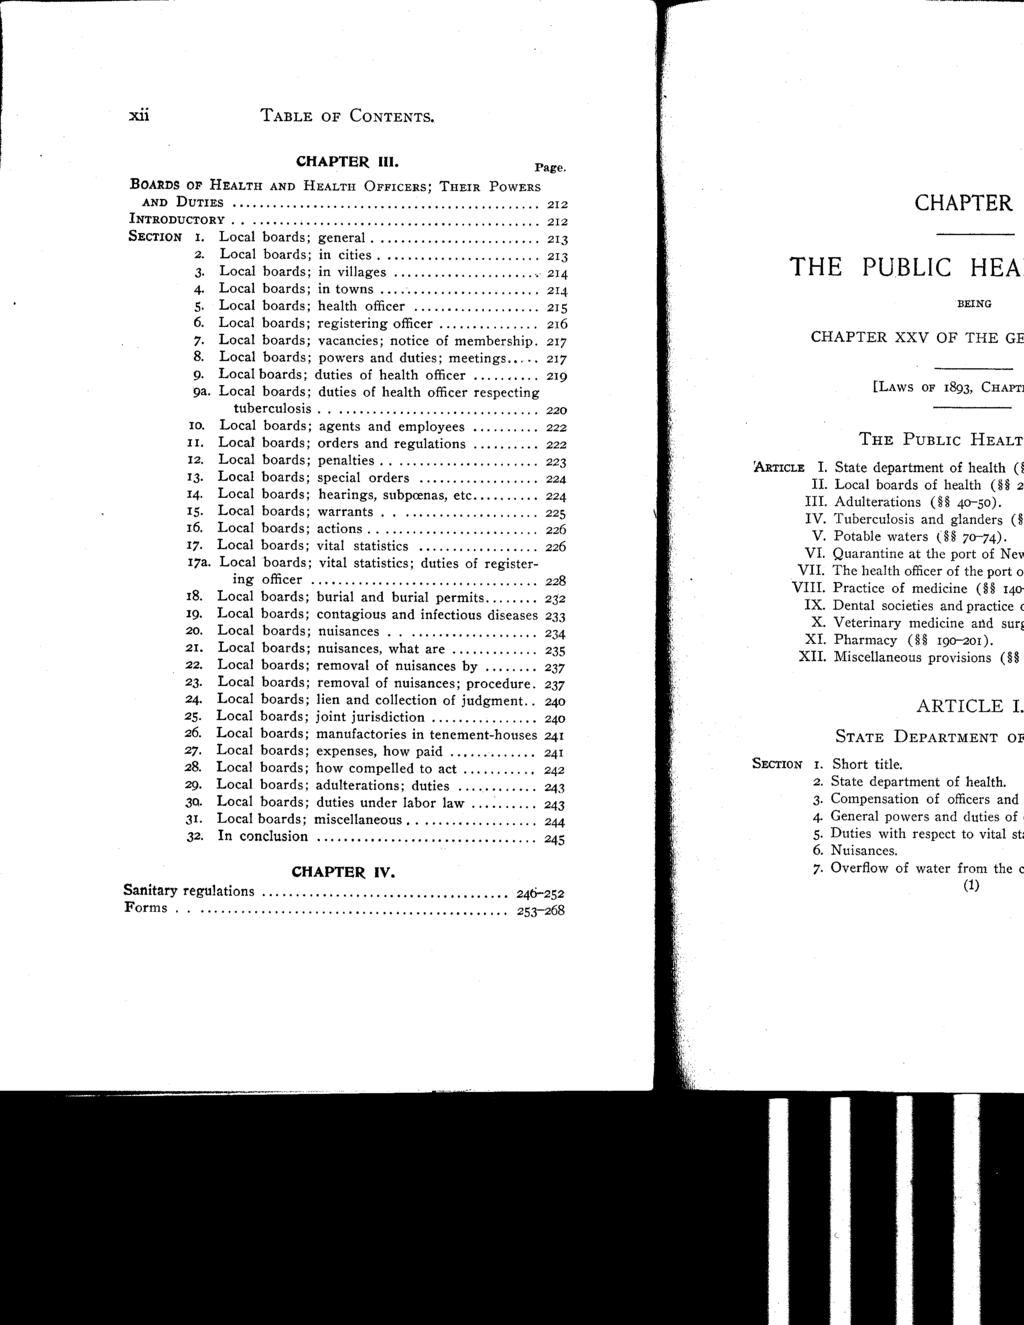 X11 TABLE OF CONTENTS. CHAPTER III. Page. BOARDS OF HEALTH AND HEALTH OFFICERS ; THEIR POWERS AND DUTIES 212 INTRODUCTORY 212 SECTION I. Local boards ; general 213 2. Local boards ; in cities 213 3.